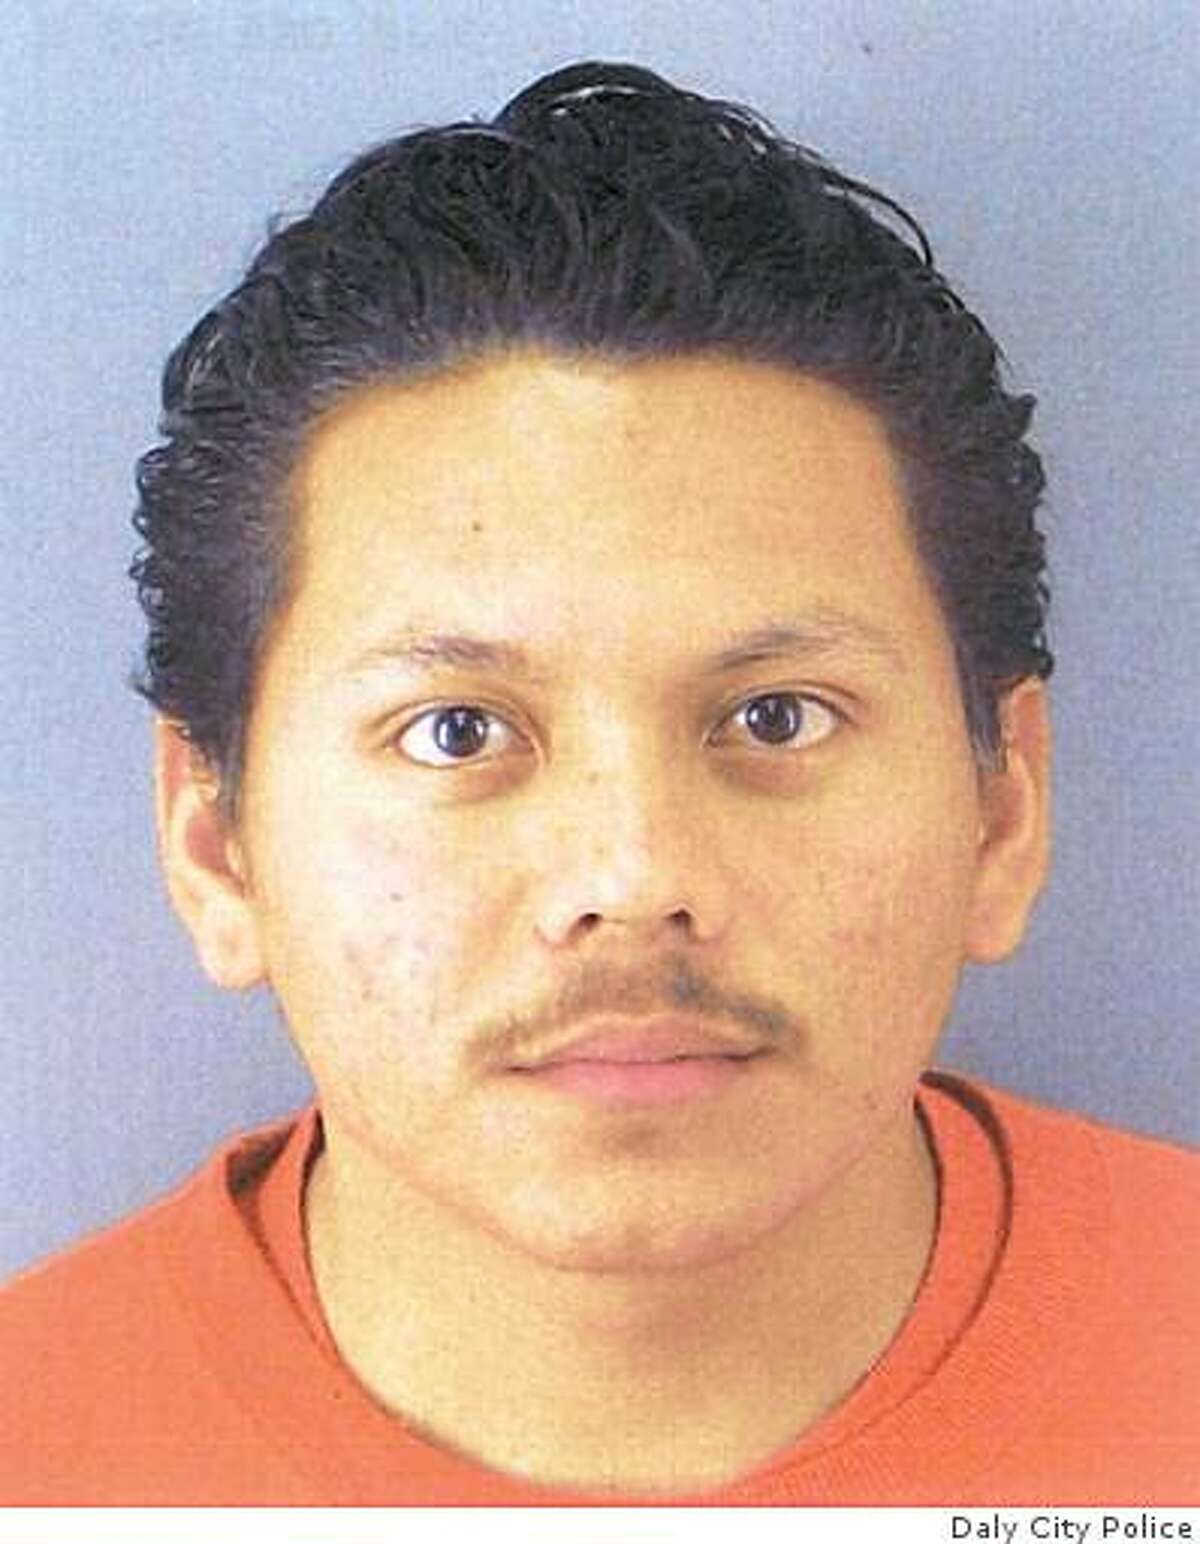 Luis Herrera, one of three men arrested in the February 2009 shooting of Moises Frias Jr. outside the Daly City BART station.